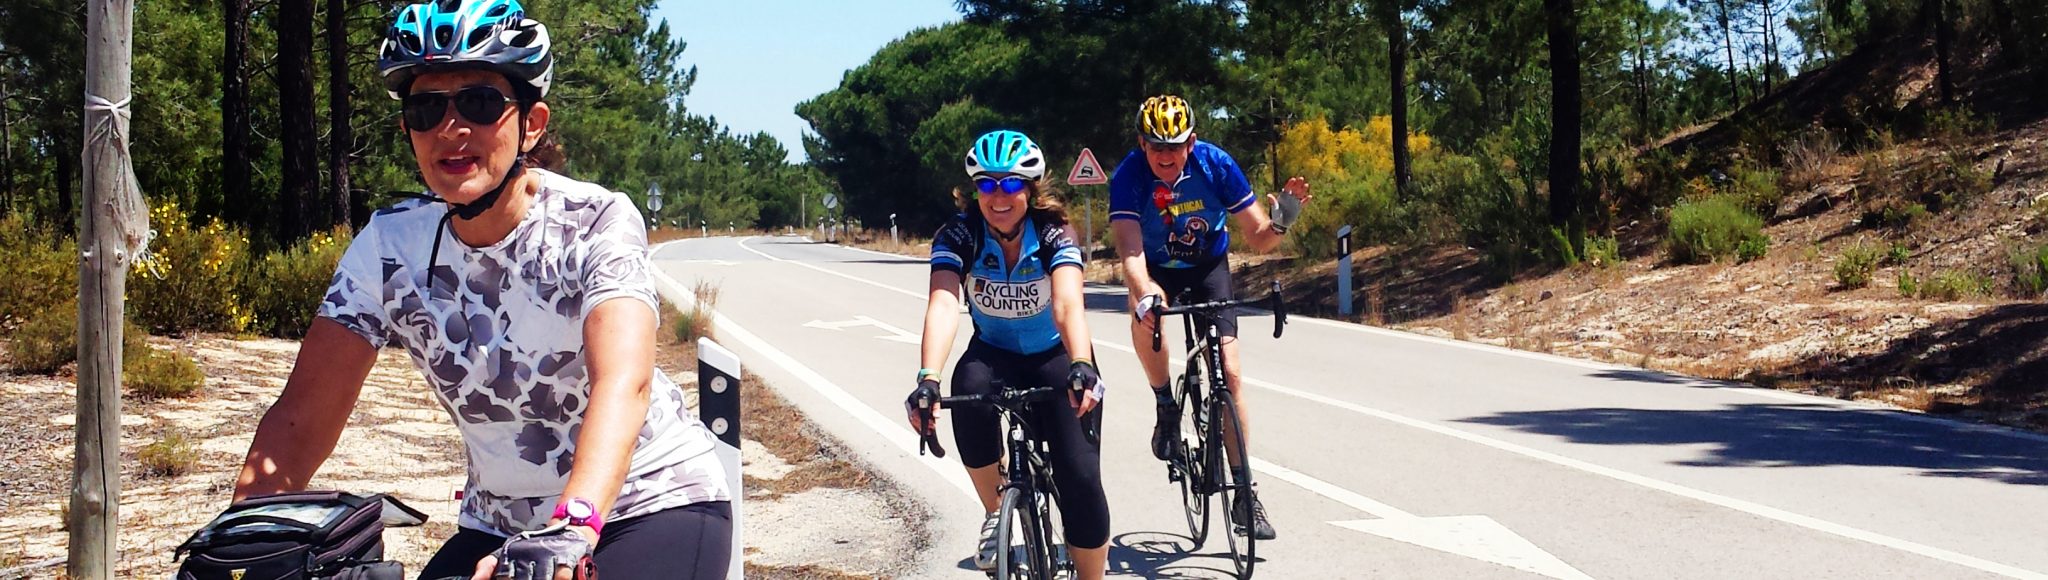 Guided Road Cycle Tour in Portugal's South, the Alentejo